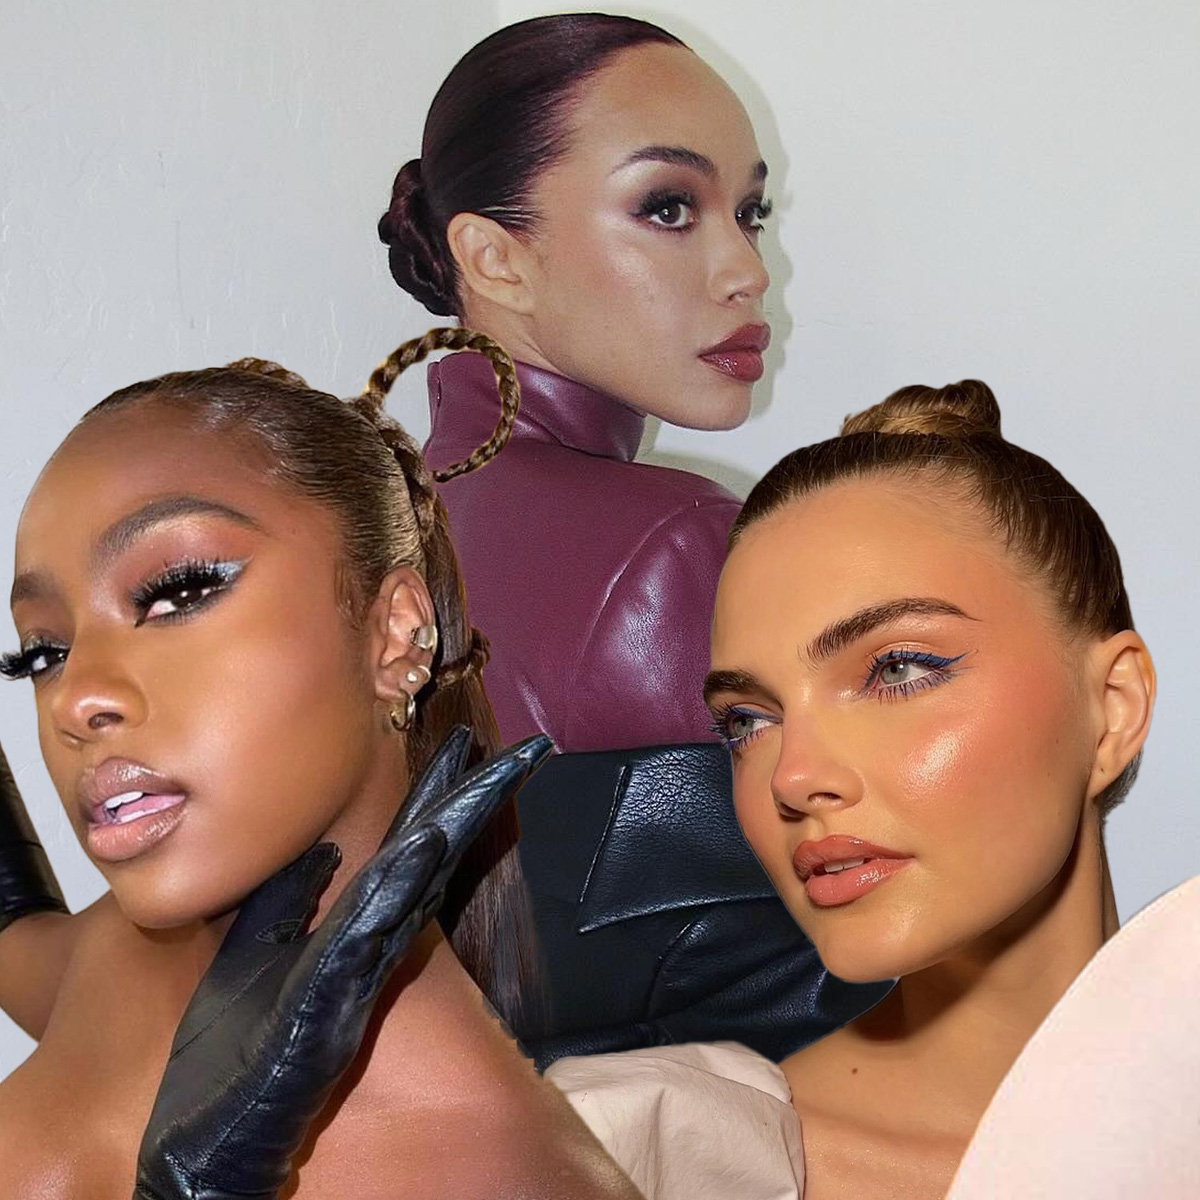 These 4 LGBTQ+ Makeup Artists and Hairstylists Celebrate Pride Long After June—Here's Why